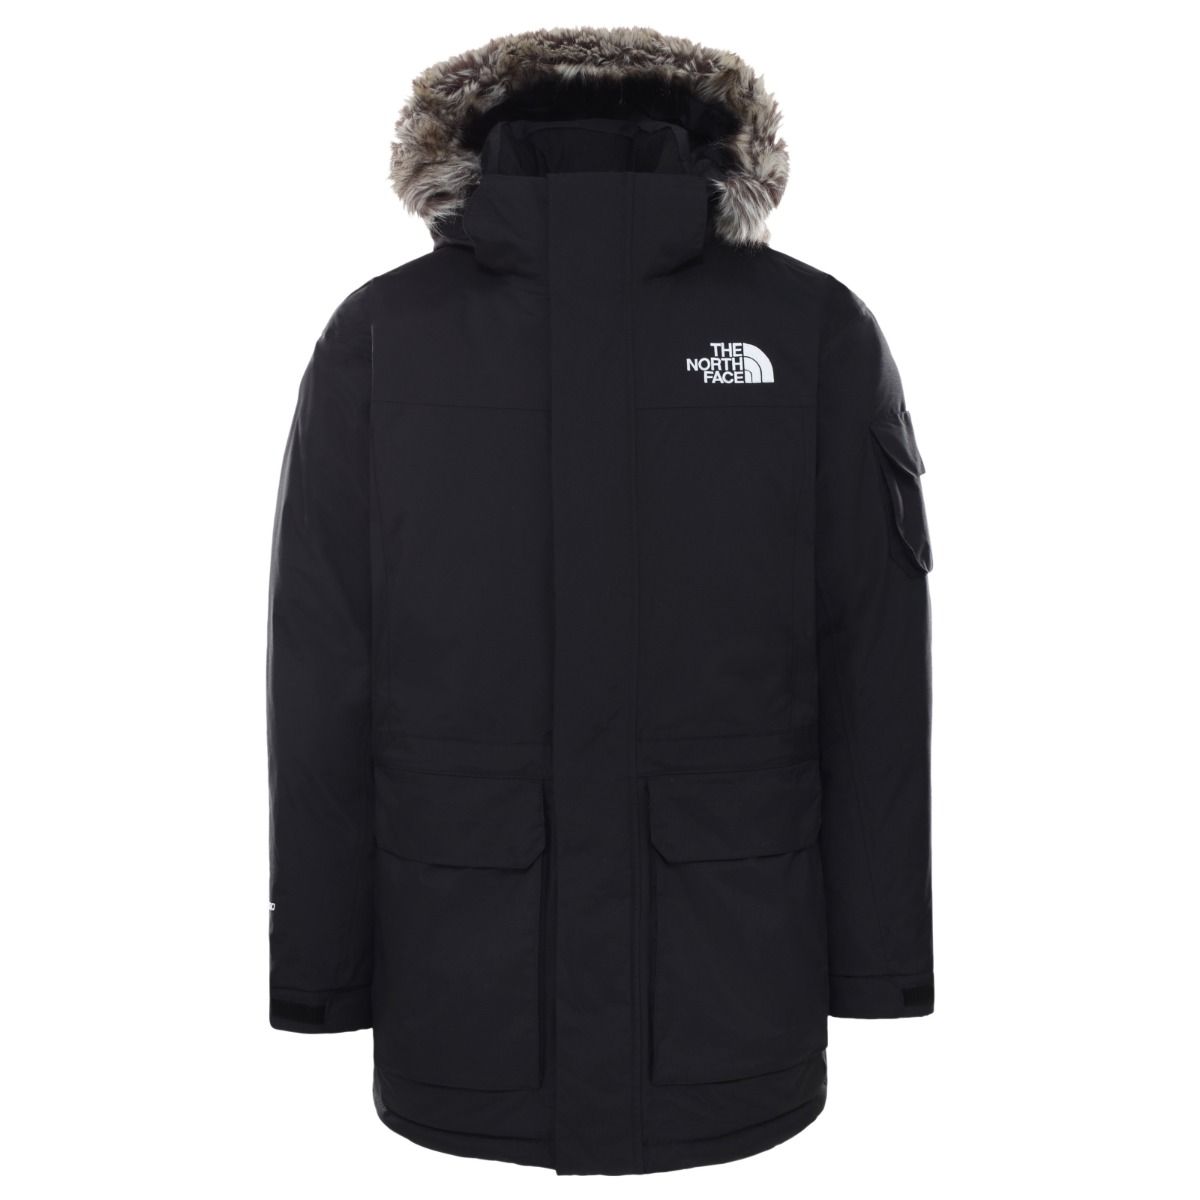 The North Face - M's Mcmurdo Jacket